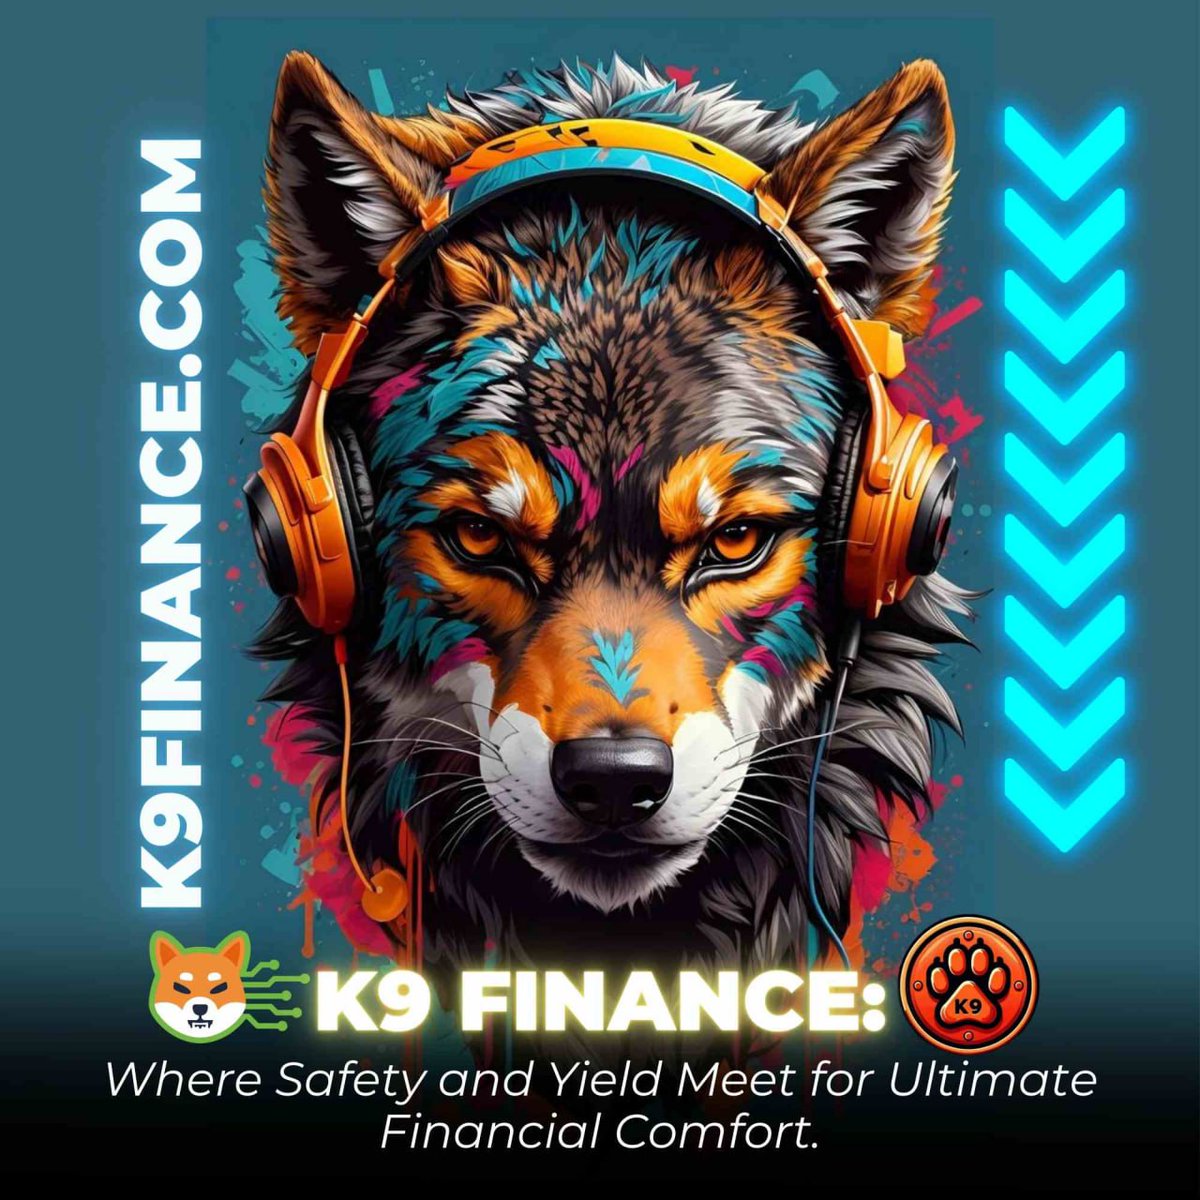 @CryptoTony__ Experience the power of financial security with K9 Finance! Invest in $KNINE token and enjoy the protected yields. #K9Finance $SHIB Learn more: @K9finance #Shibarium #k9 #SHIB #Defi #shibaArmy #EliteMarketingArmy